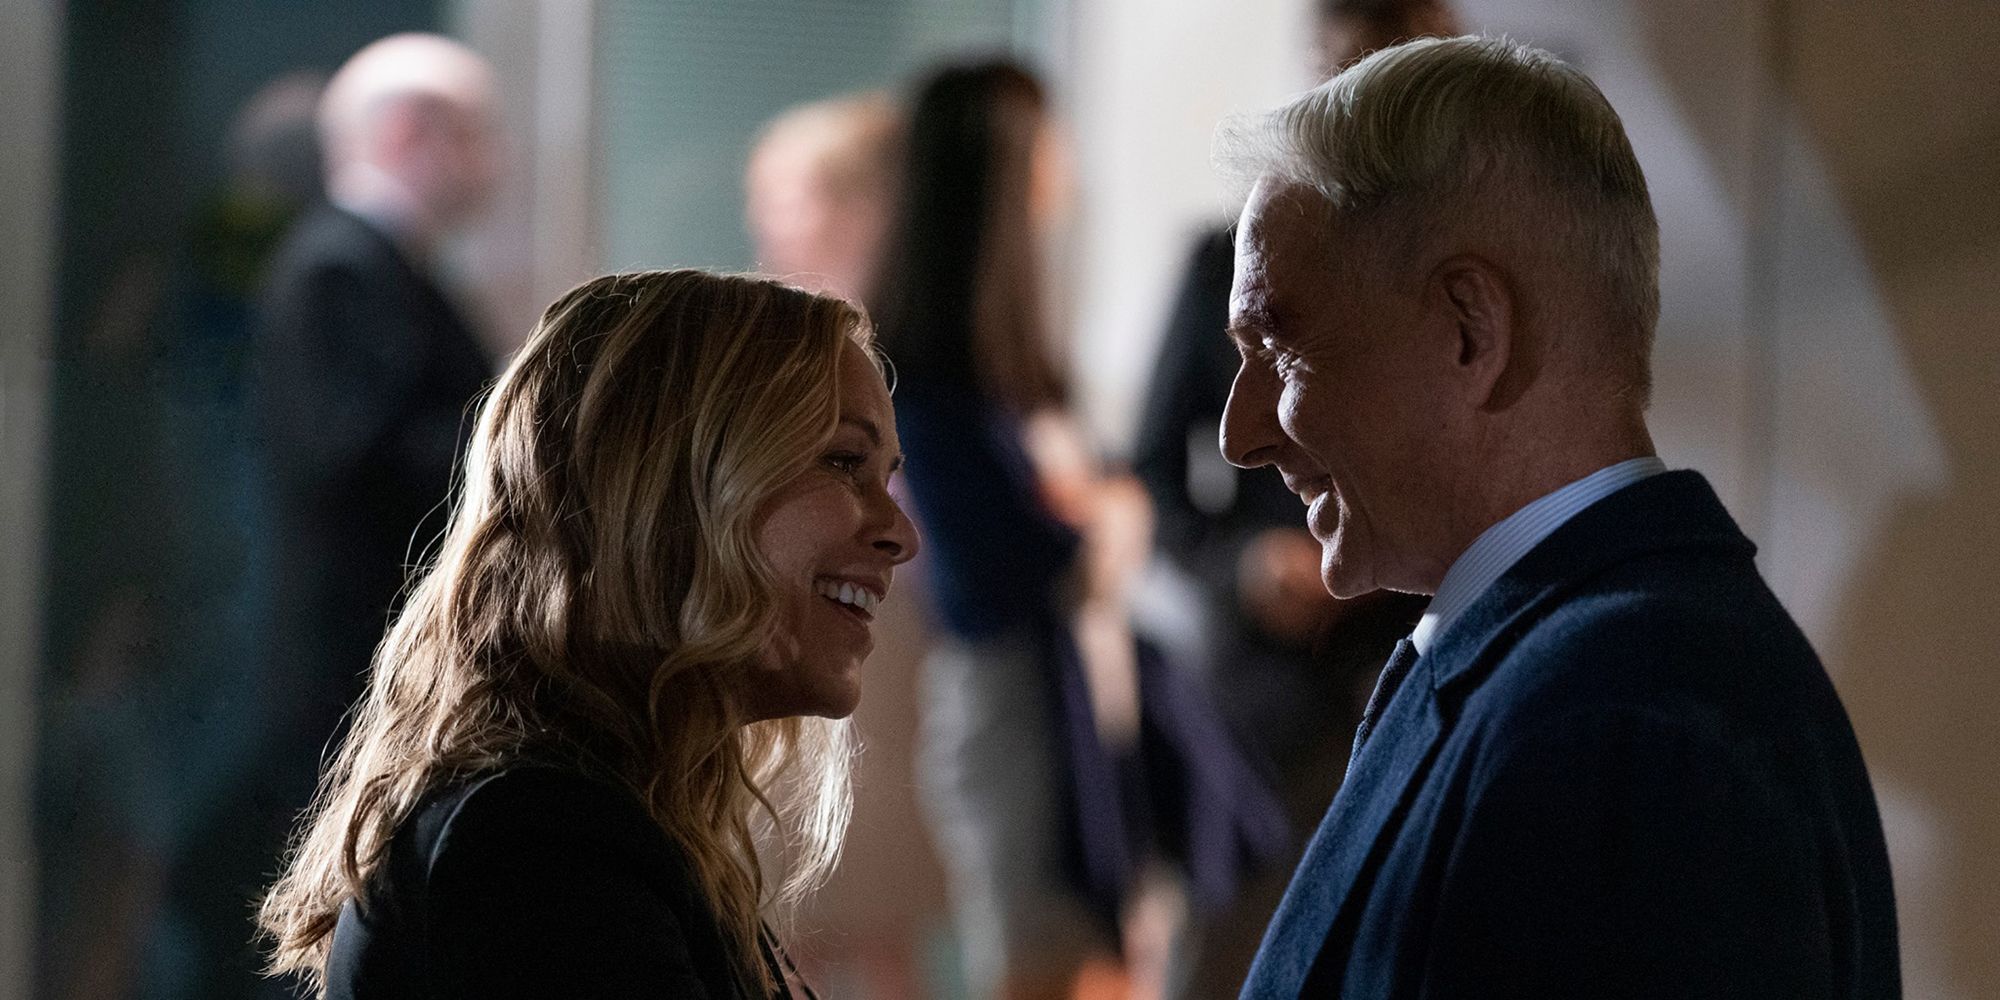 Jacqueline Sloane and Leroy Gibbs share light conversation in NCIS